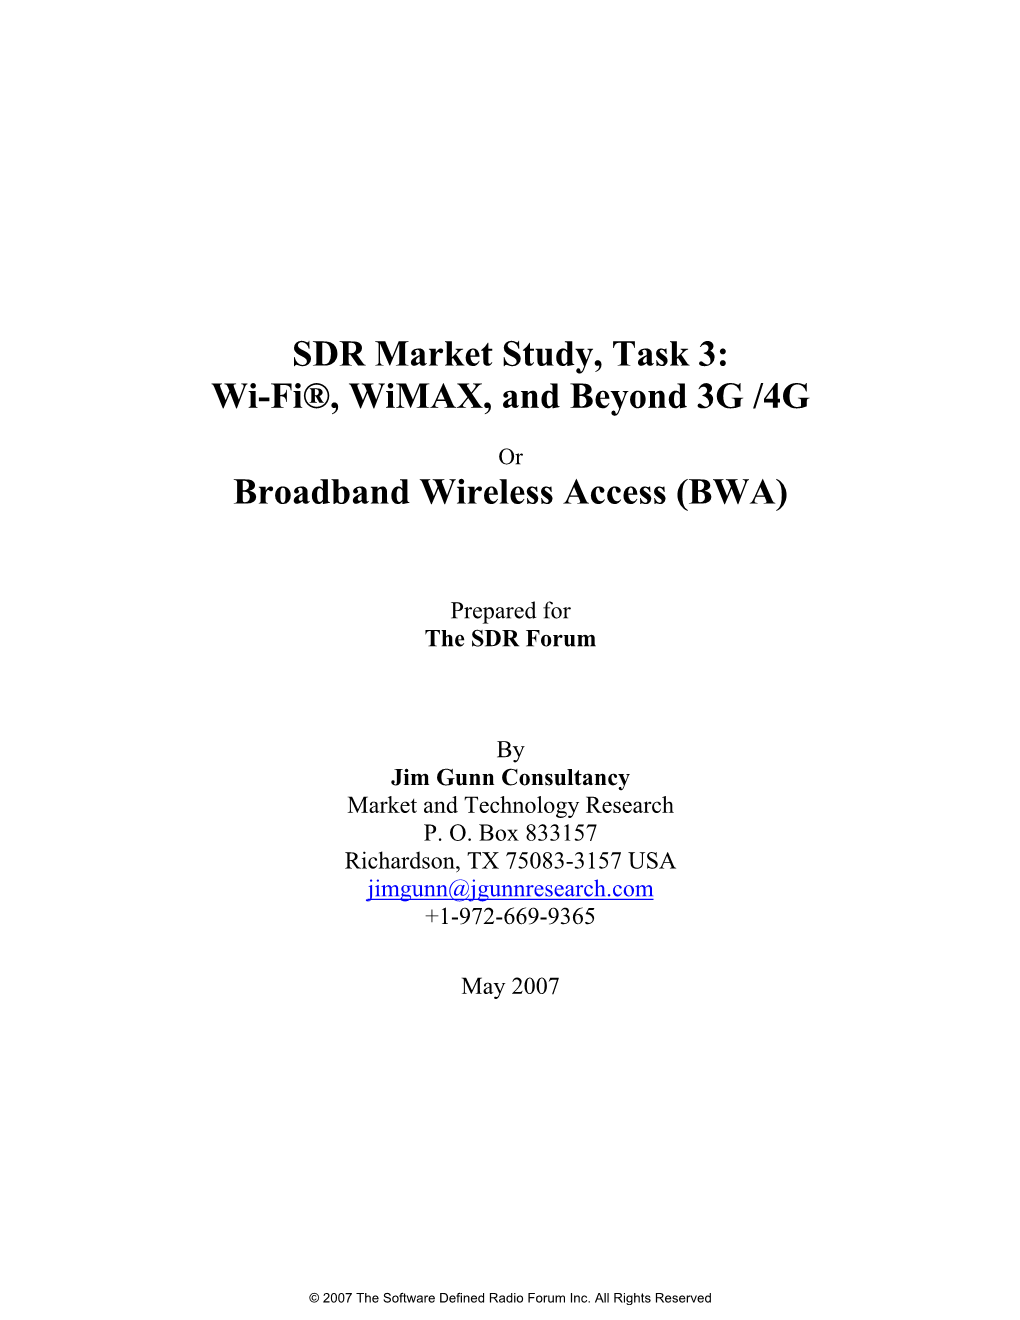 SDR Market Study Task 3: Wi-Fi, Wimax, and Beyond 3G/4G